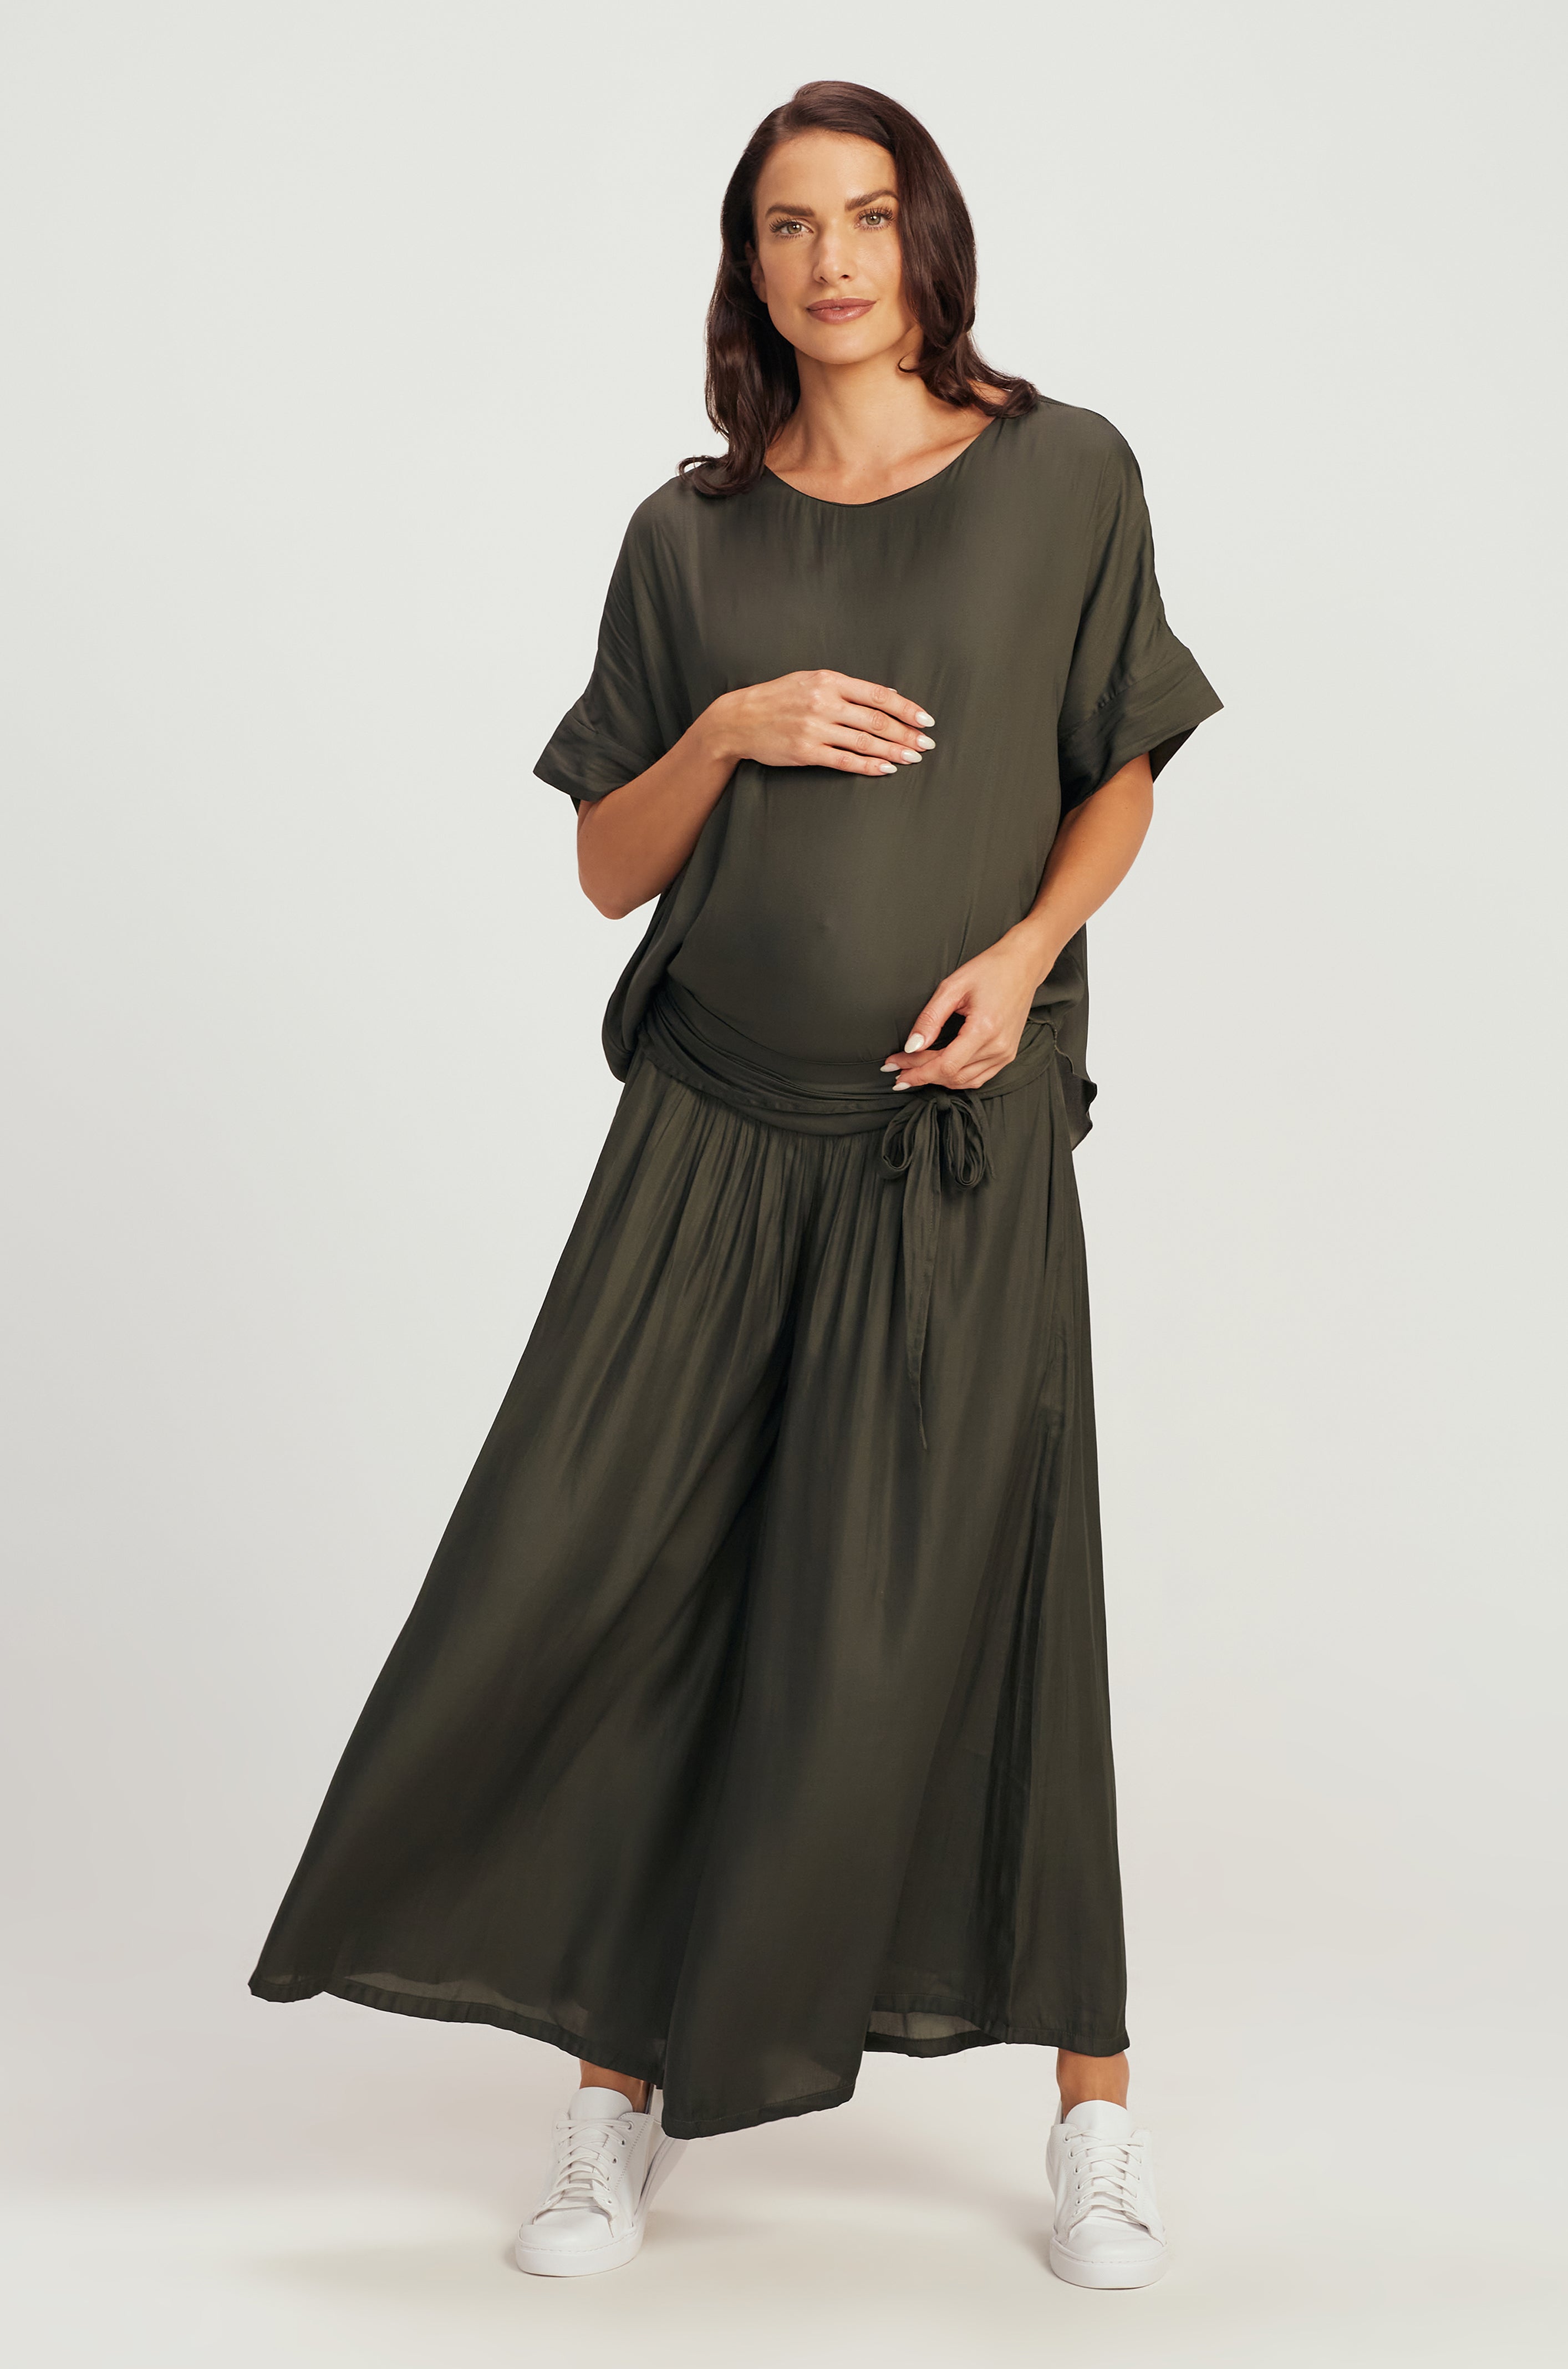 THE STAPLE TOP/ SAGE GREEN / MATERNITY